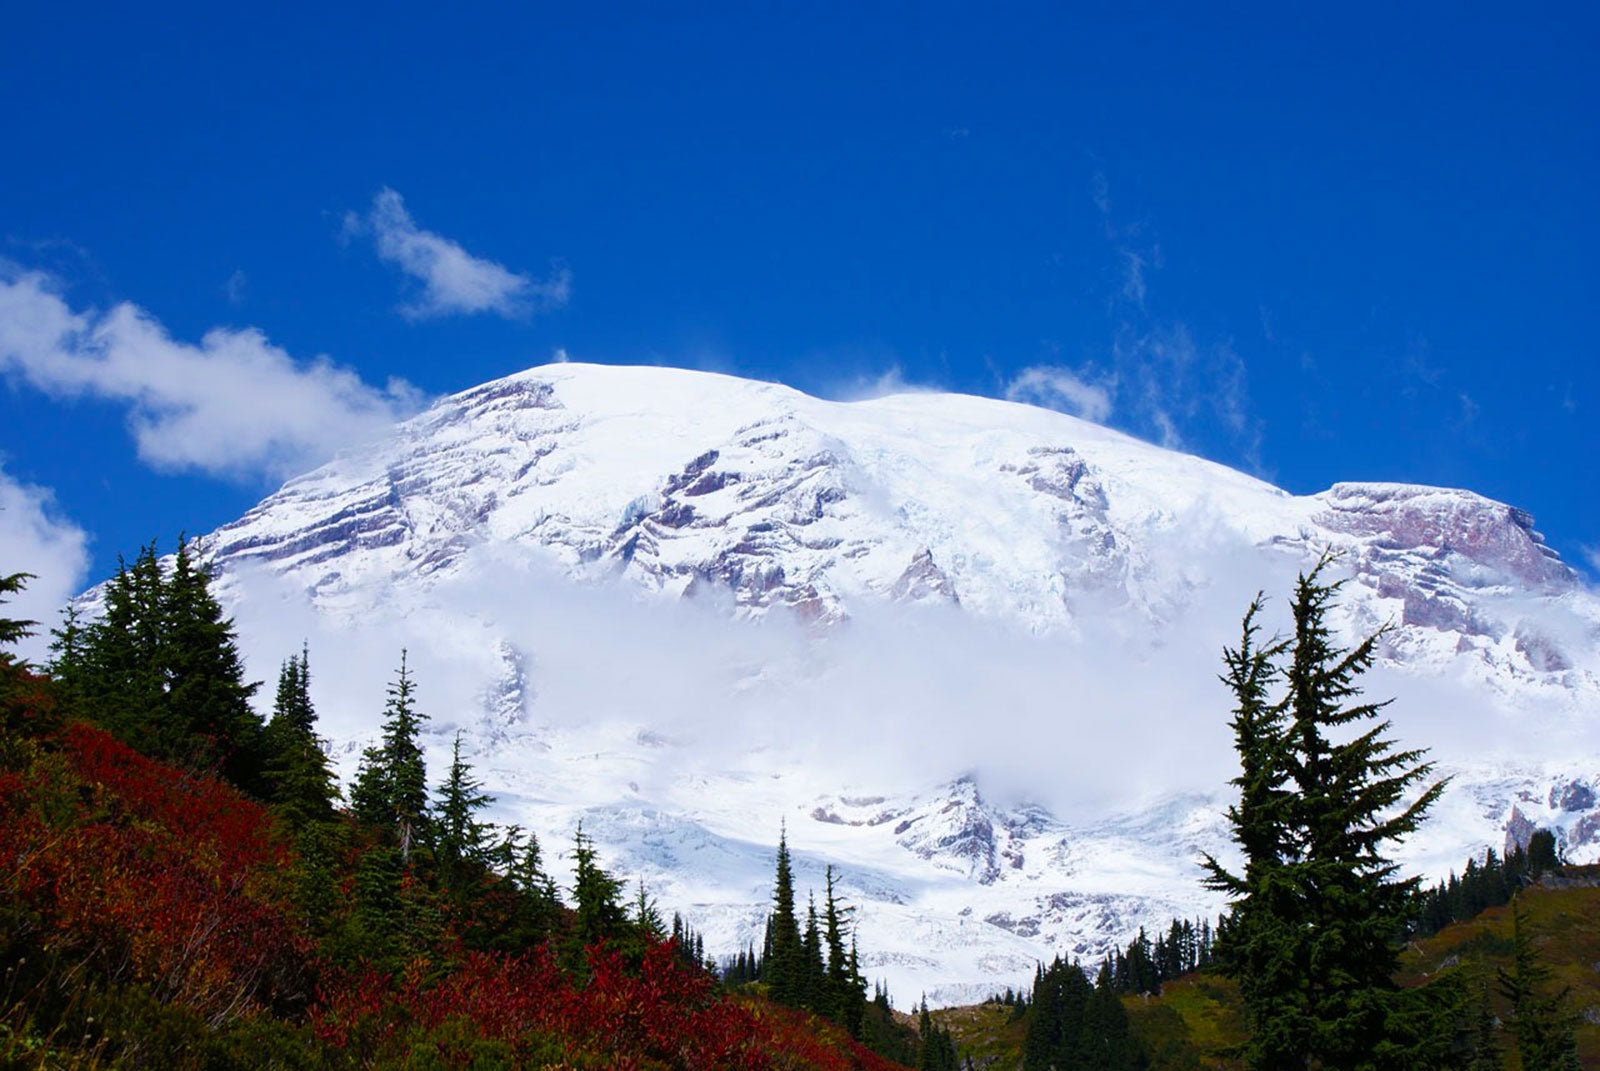 Mt Rainier during fall season with lots of colorful fall leaves.